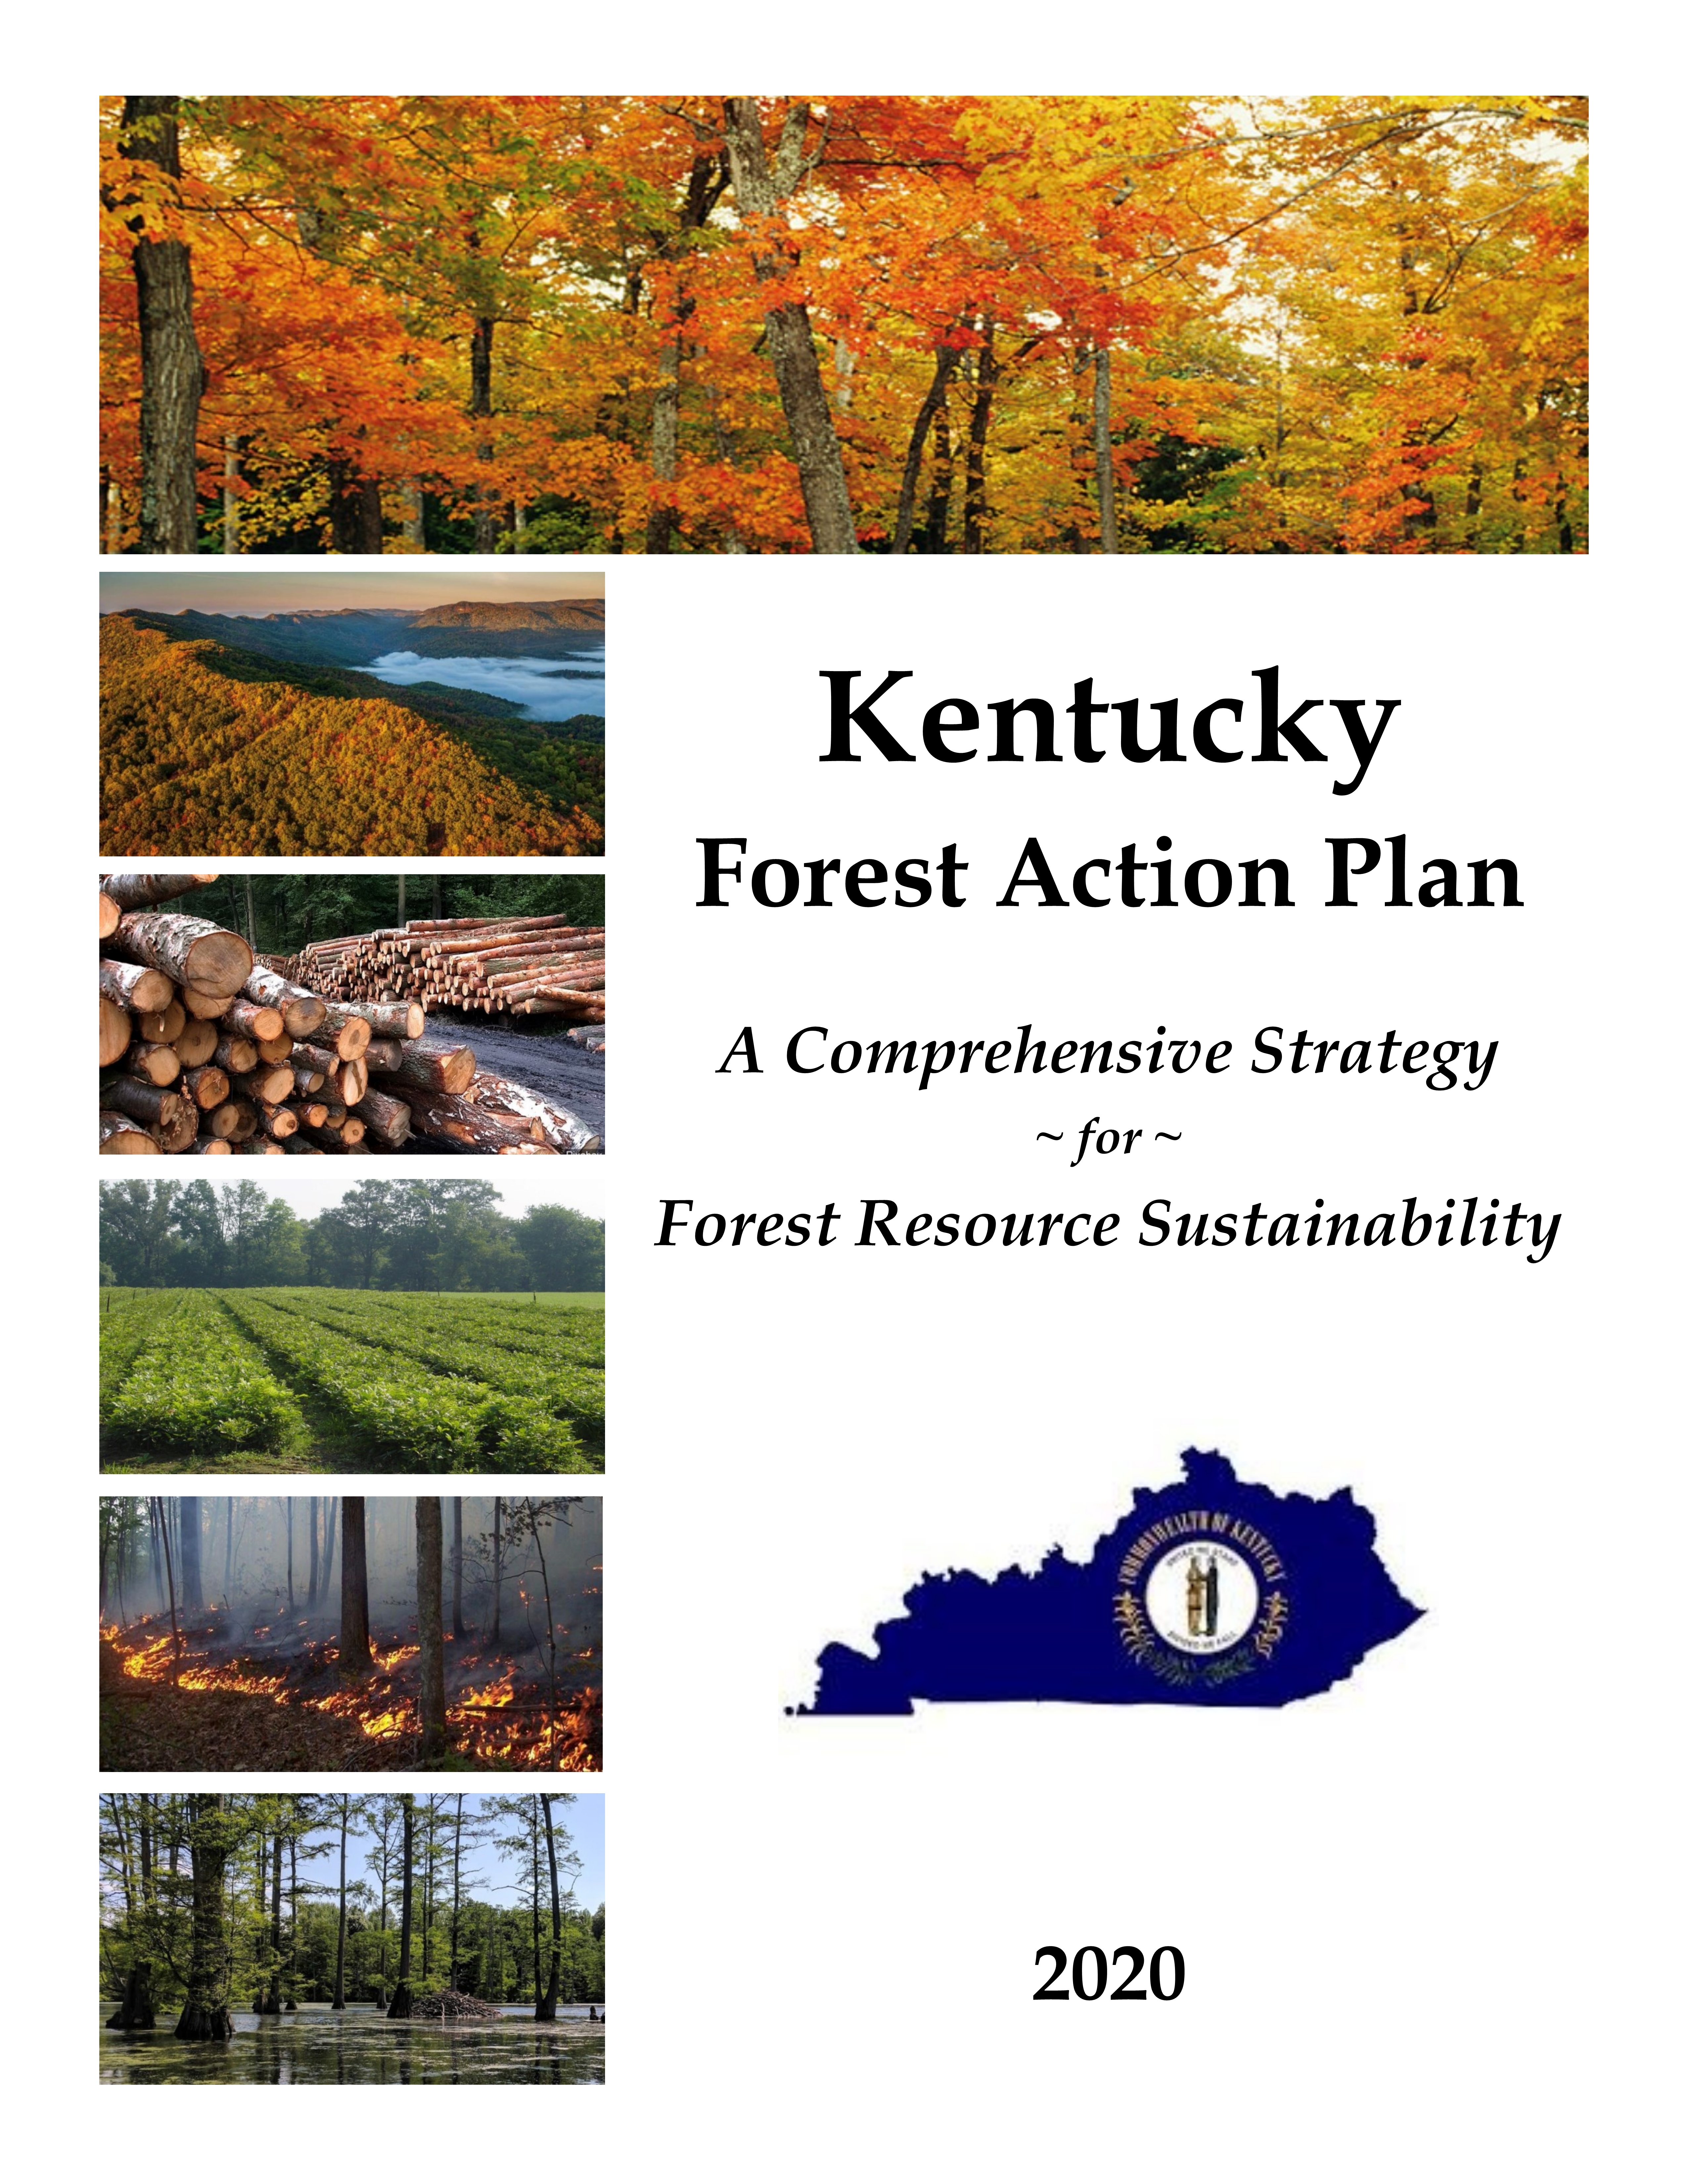 Statewide Assessment of Forest Resources and Strategy presentation image